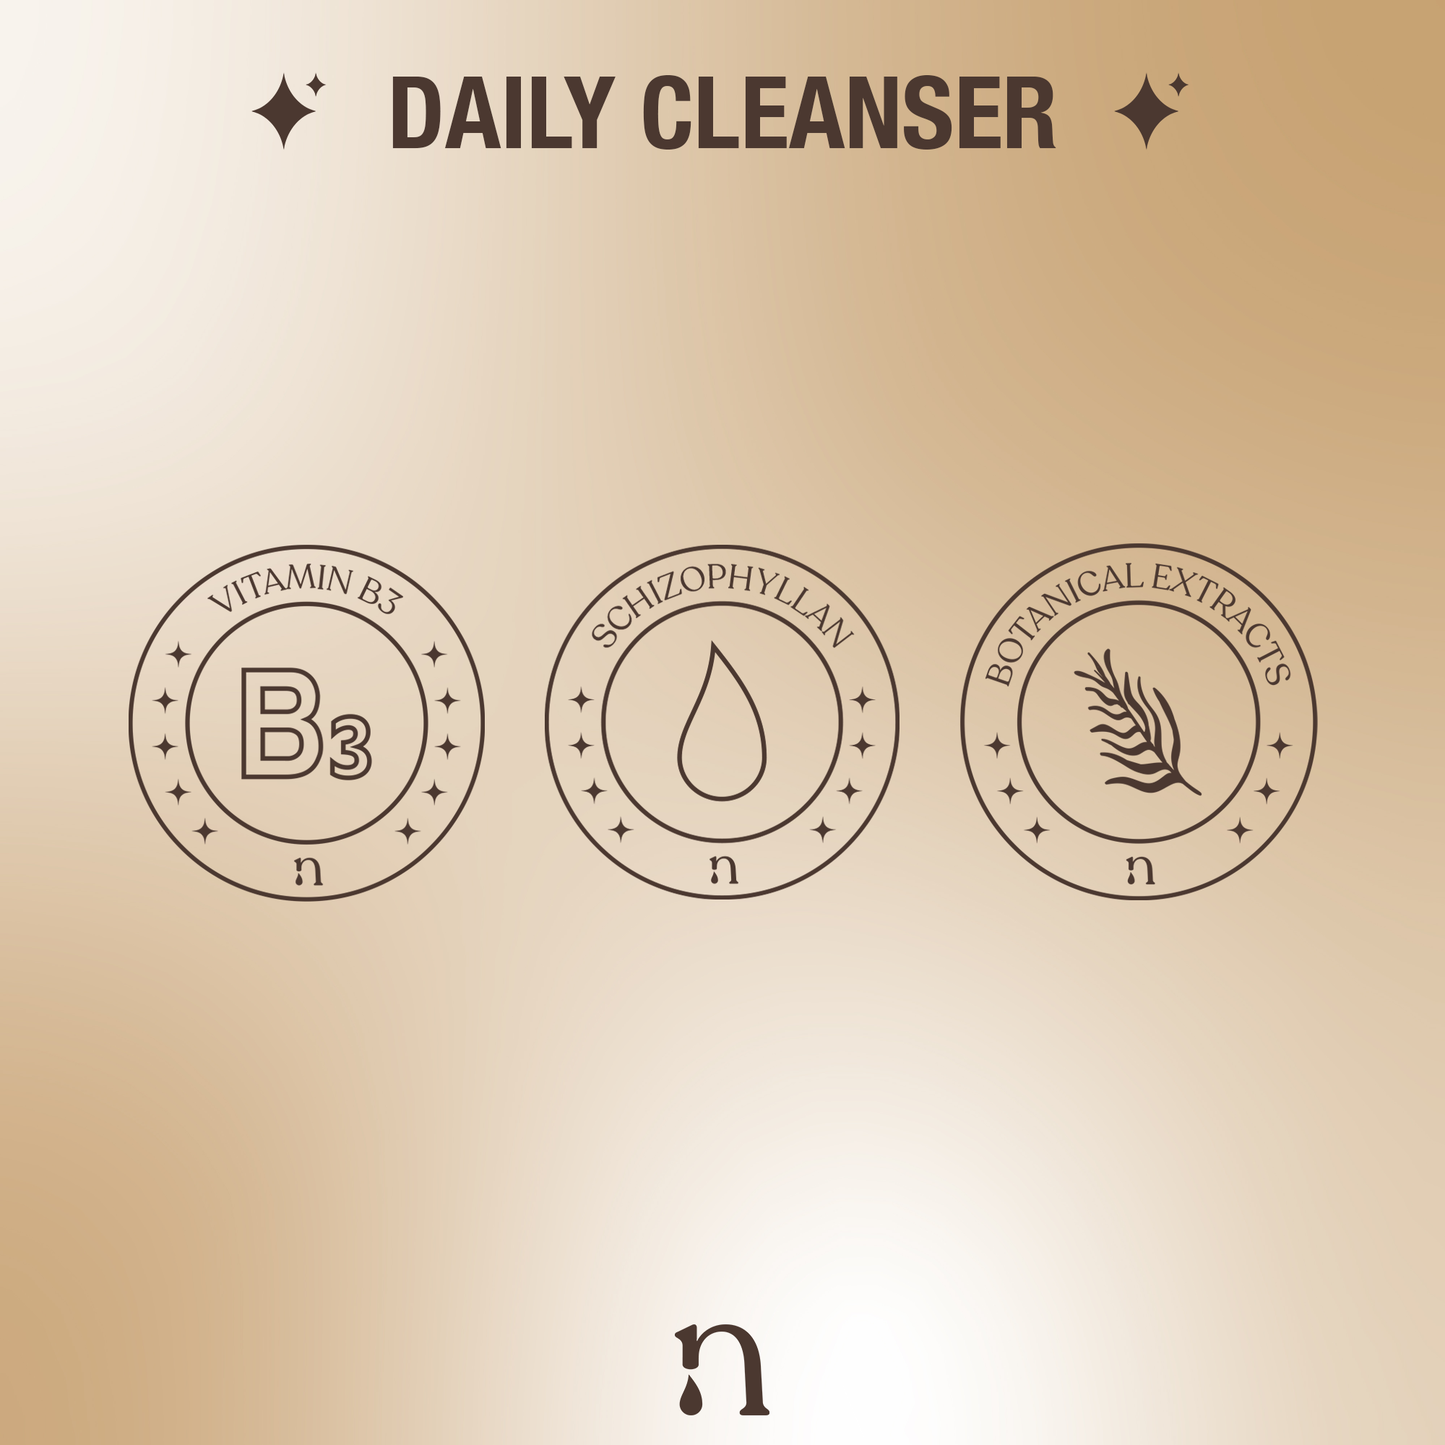 Graphic representation of key ingredients for a daily facial cleanser, depicted with icons on a neutral background. The icons visually communicate the refreshing components that contribute to the cleanser's efficacy for a revitalizing skincare routine.